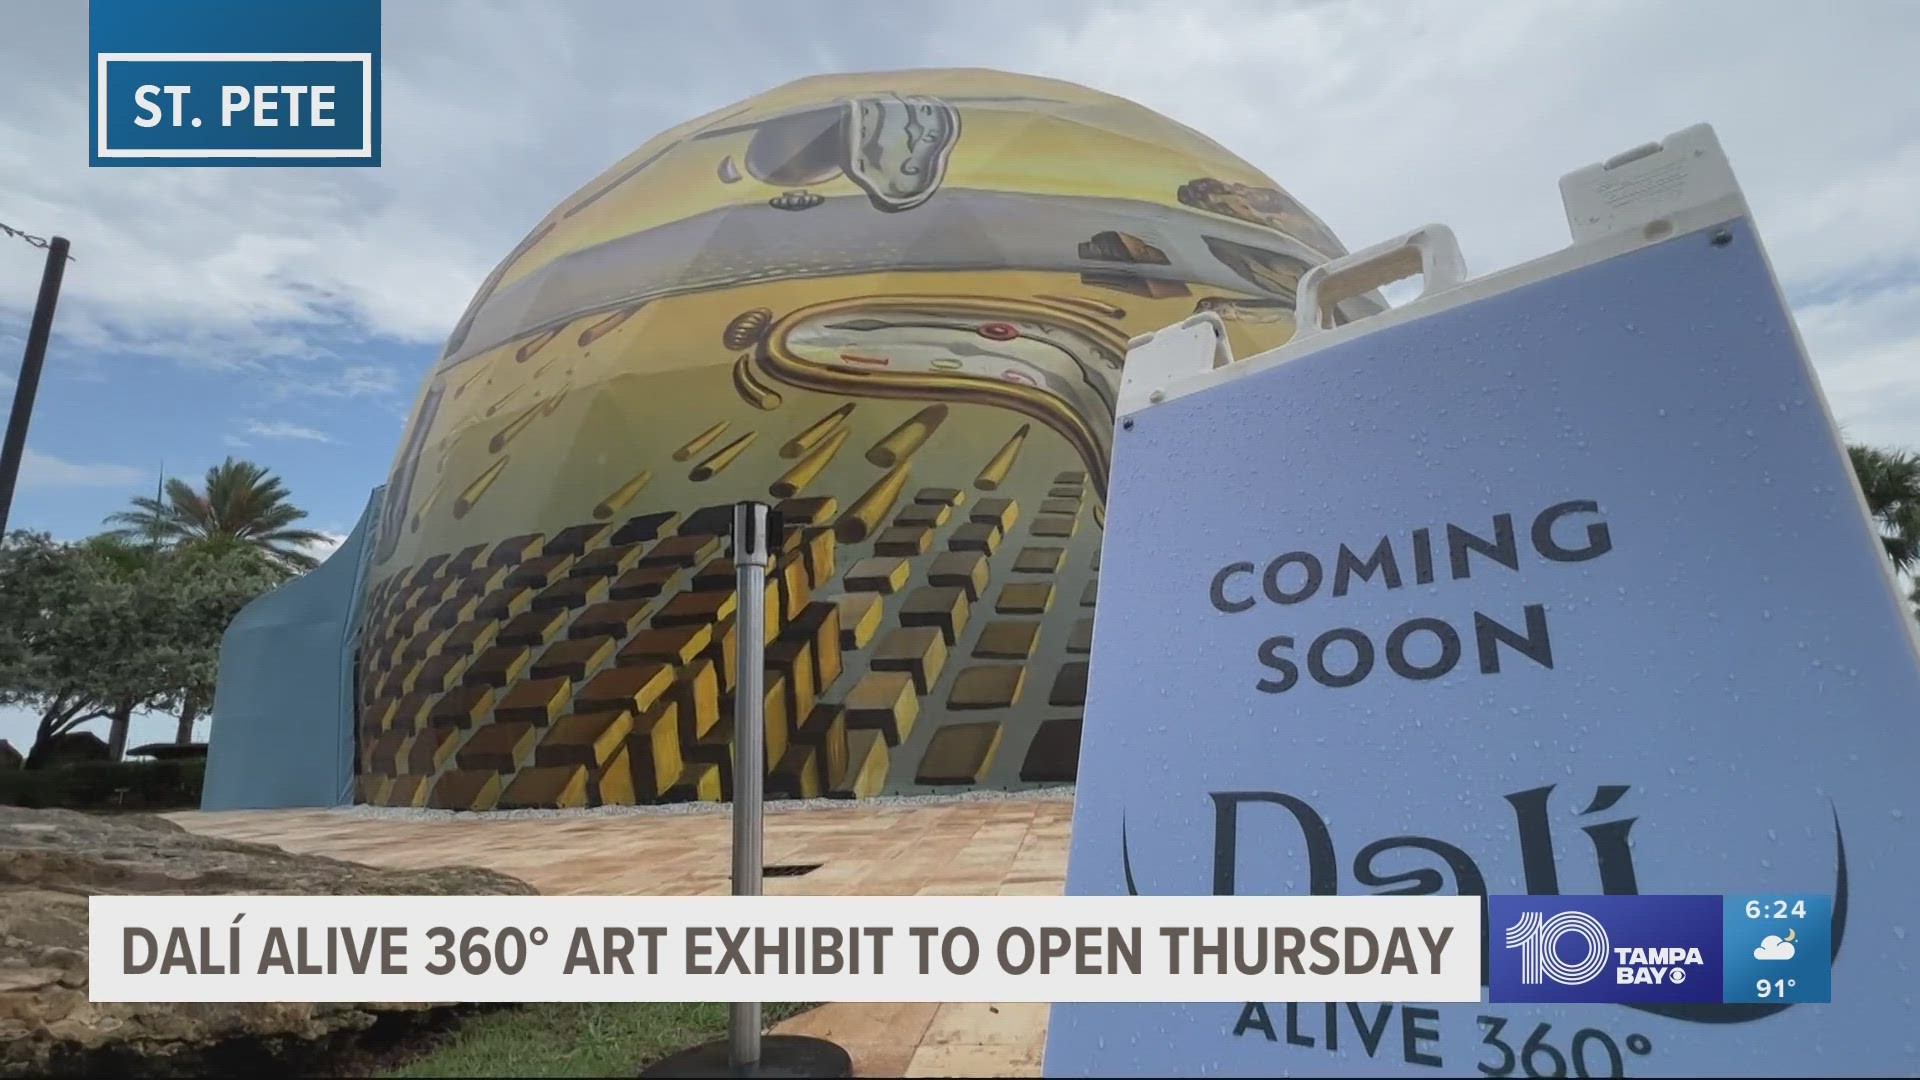 This immersive exhibit will tell the story of the surrealist painter's life in the museum's brand new addition: The Dalí Dome.